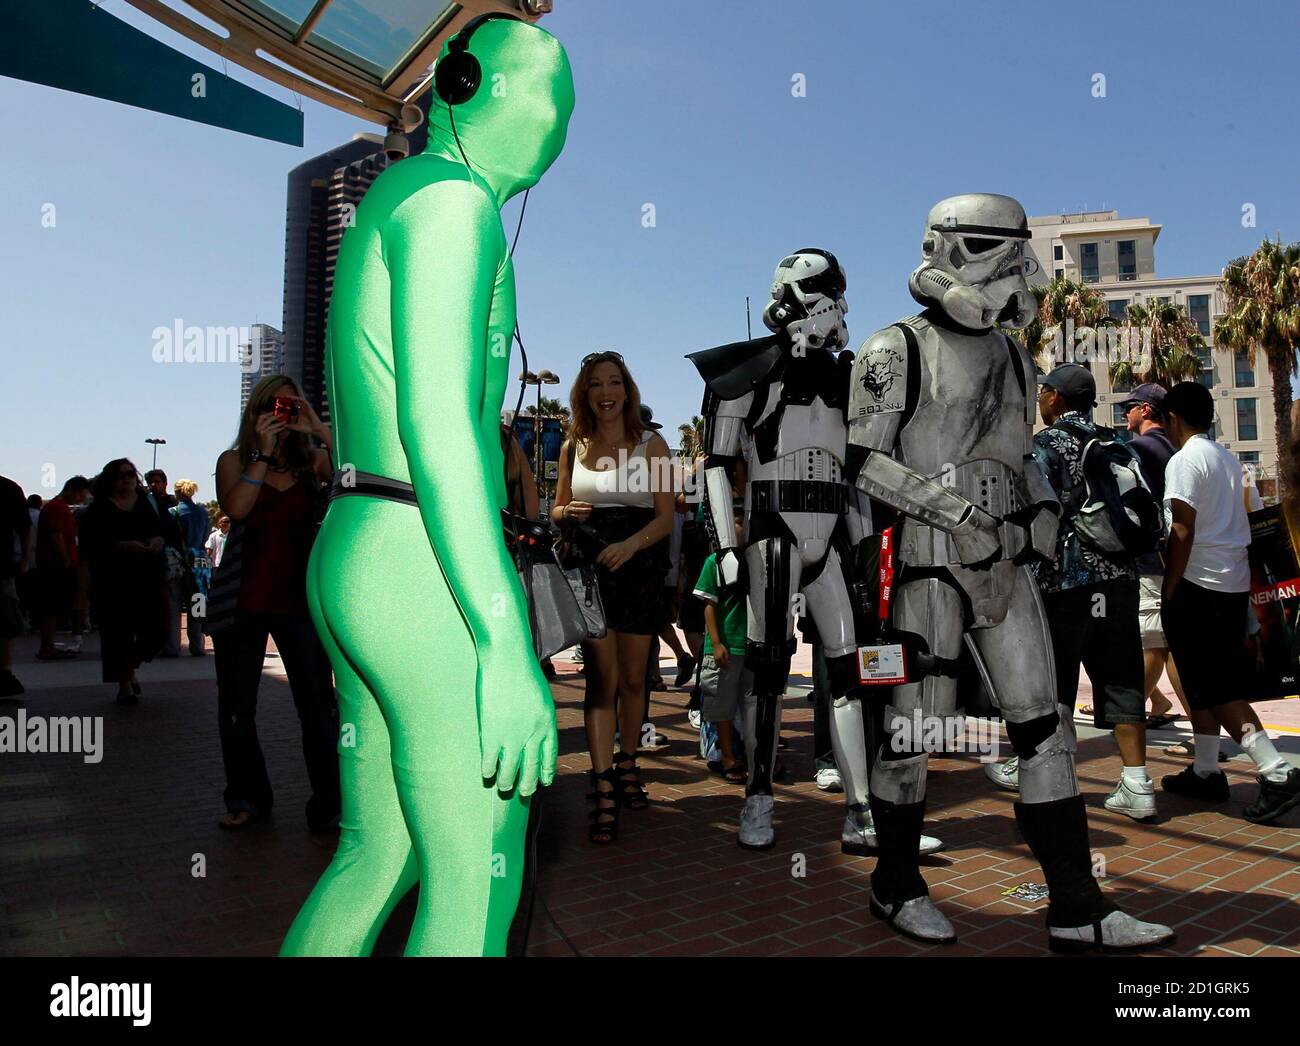 Attendees arrive dressed as 'Stormtroopers' for the third day of the pop culture convention Comic Con in San Diego, California July 24, 2010.    REUTERS/Mike Blake  (UNITED STATES - Tags: ENTERTAINMENT) Stock Photo